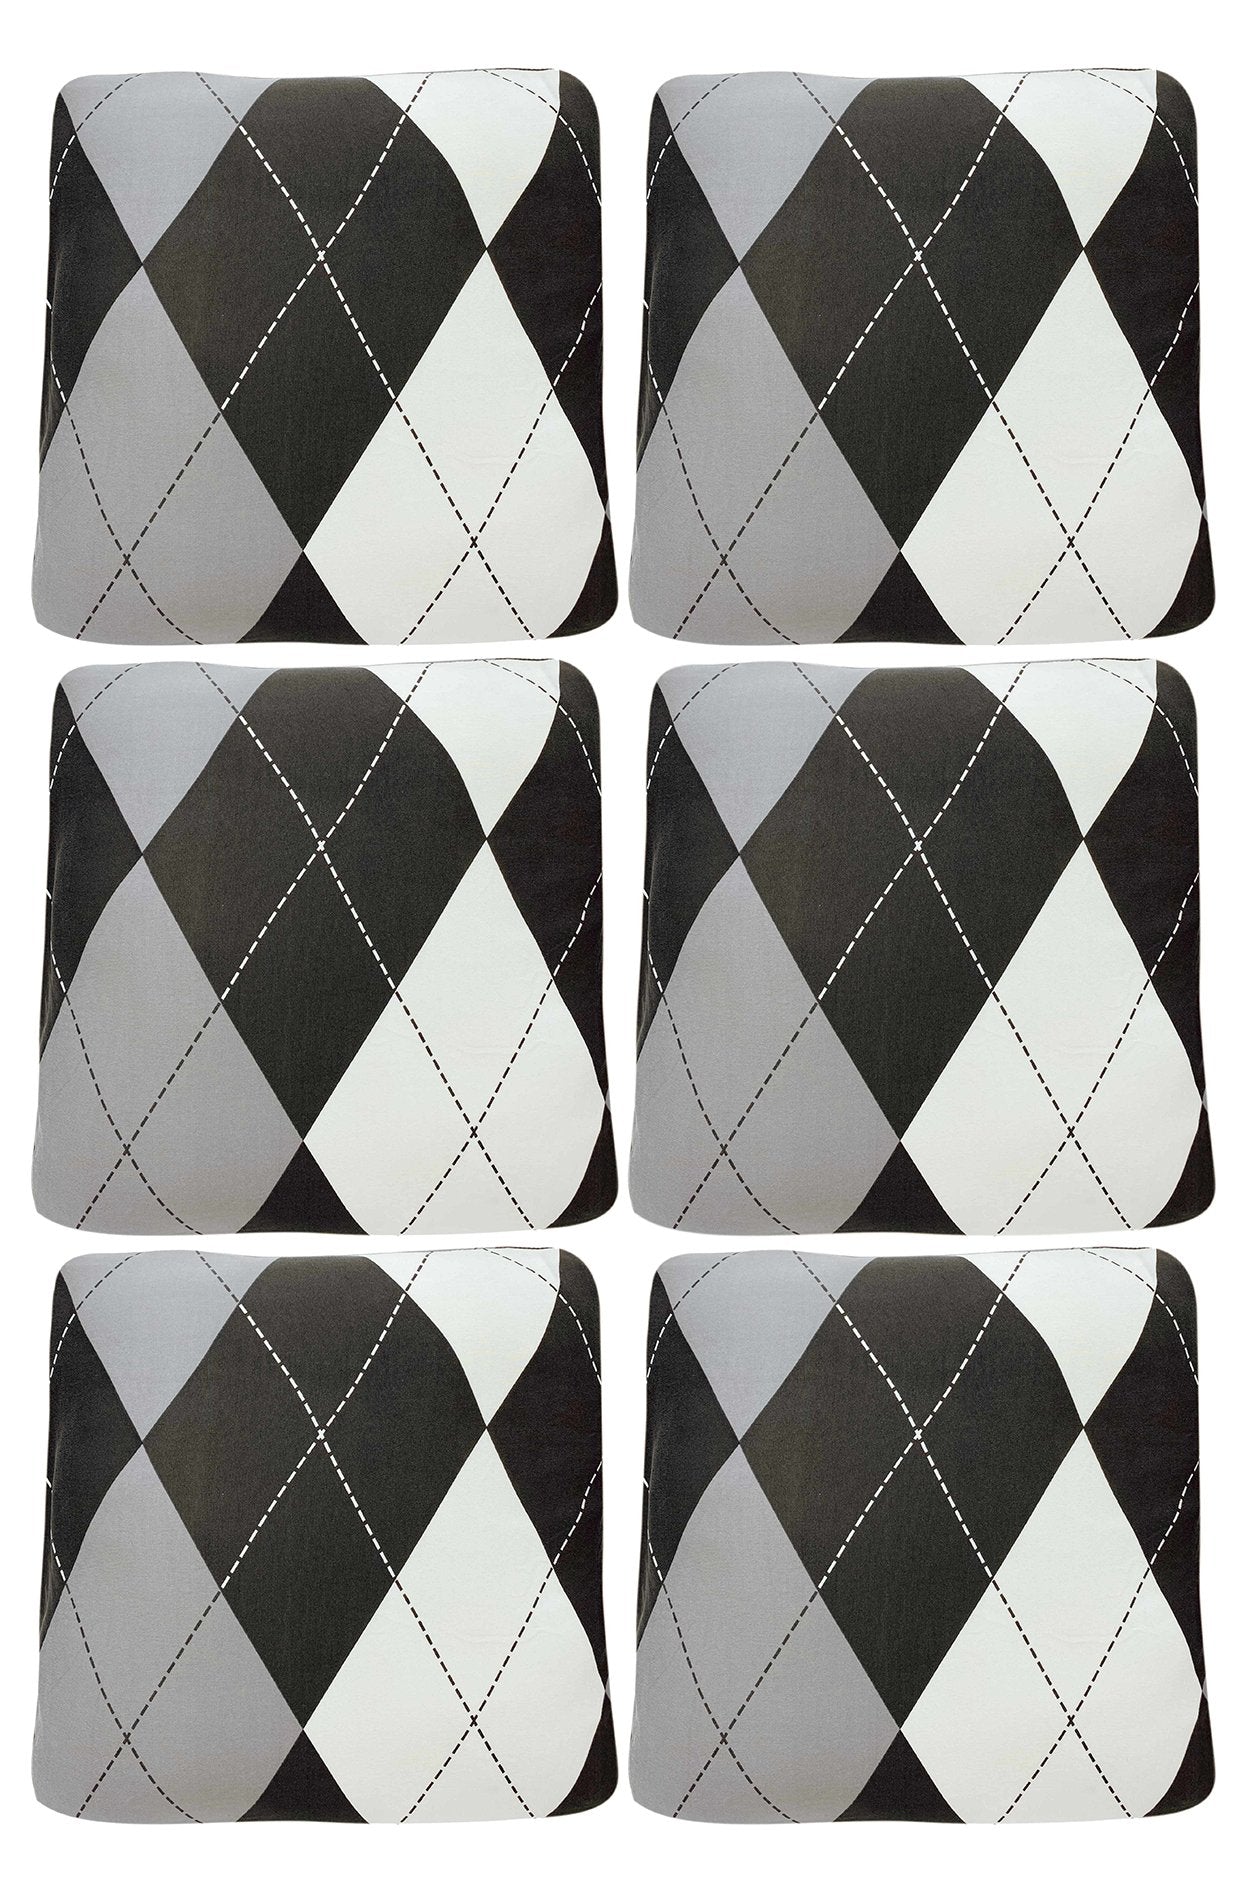 Polyester Cushion Cover - Black/Grey